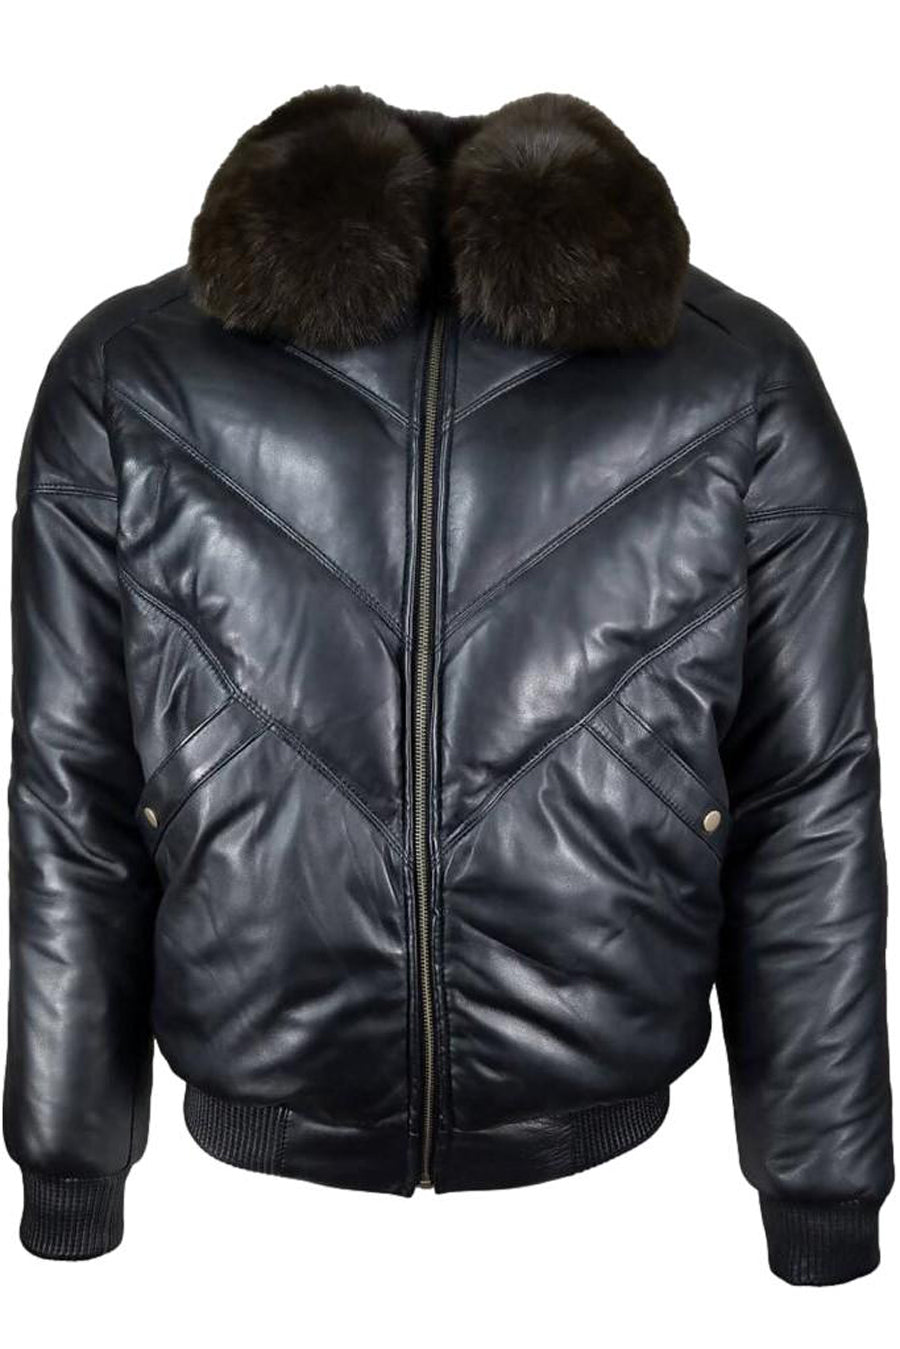 Luxurious Mens Black Leather Bomber Jacket with real Fox Fur Collar-  ChersDelights Leather Apparel